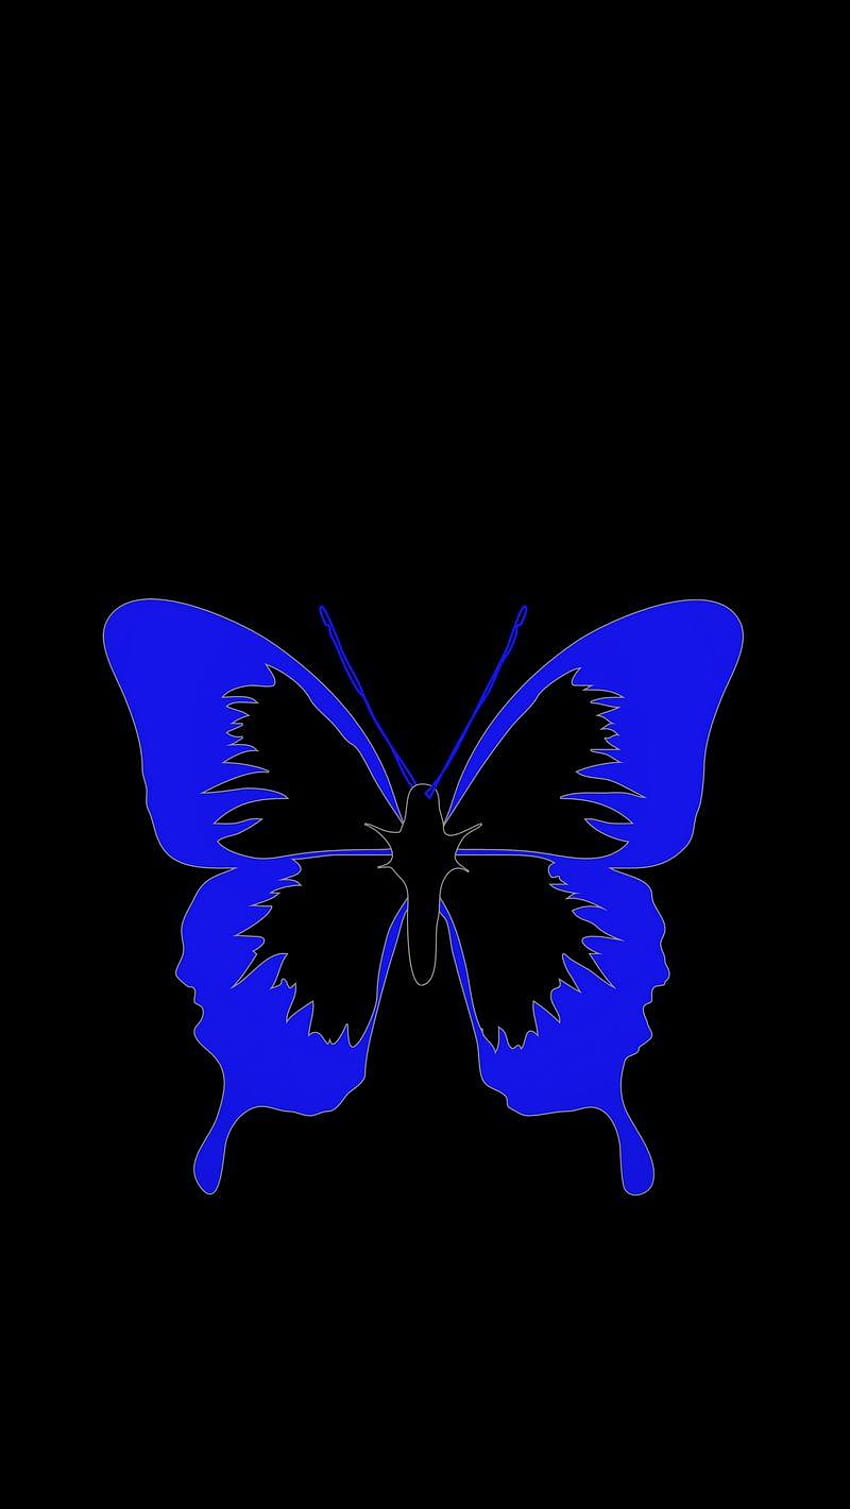 Butterfly black background Stock Photos Royalty Free Butterfly black  background Images  Depositphotos